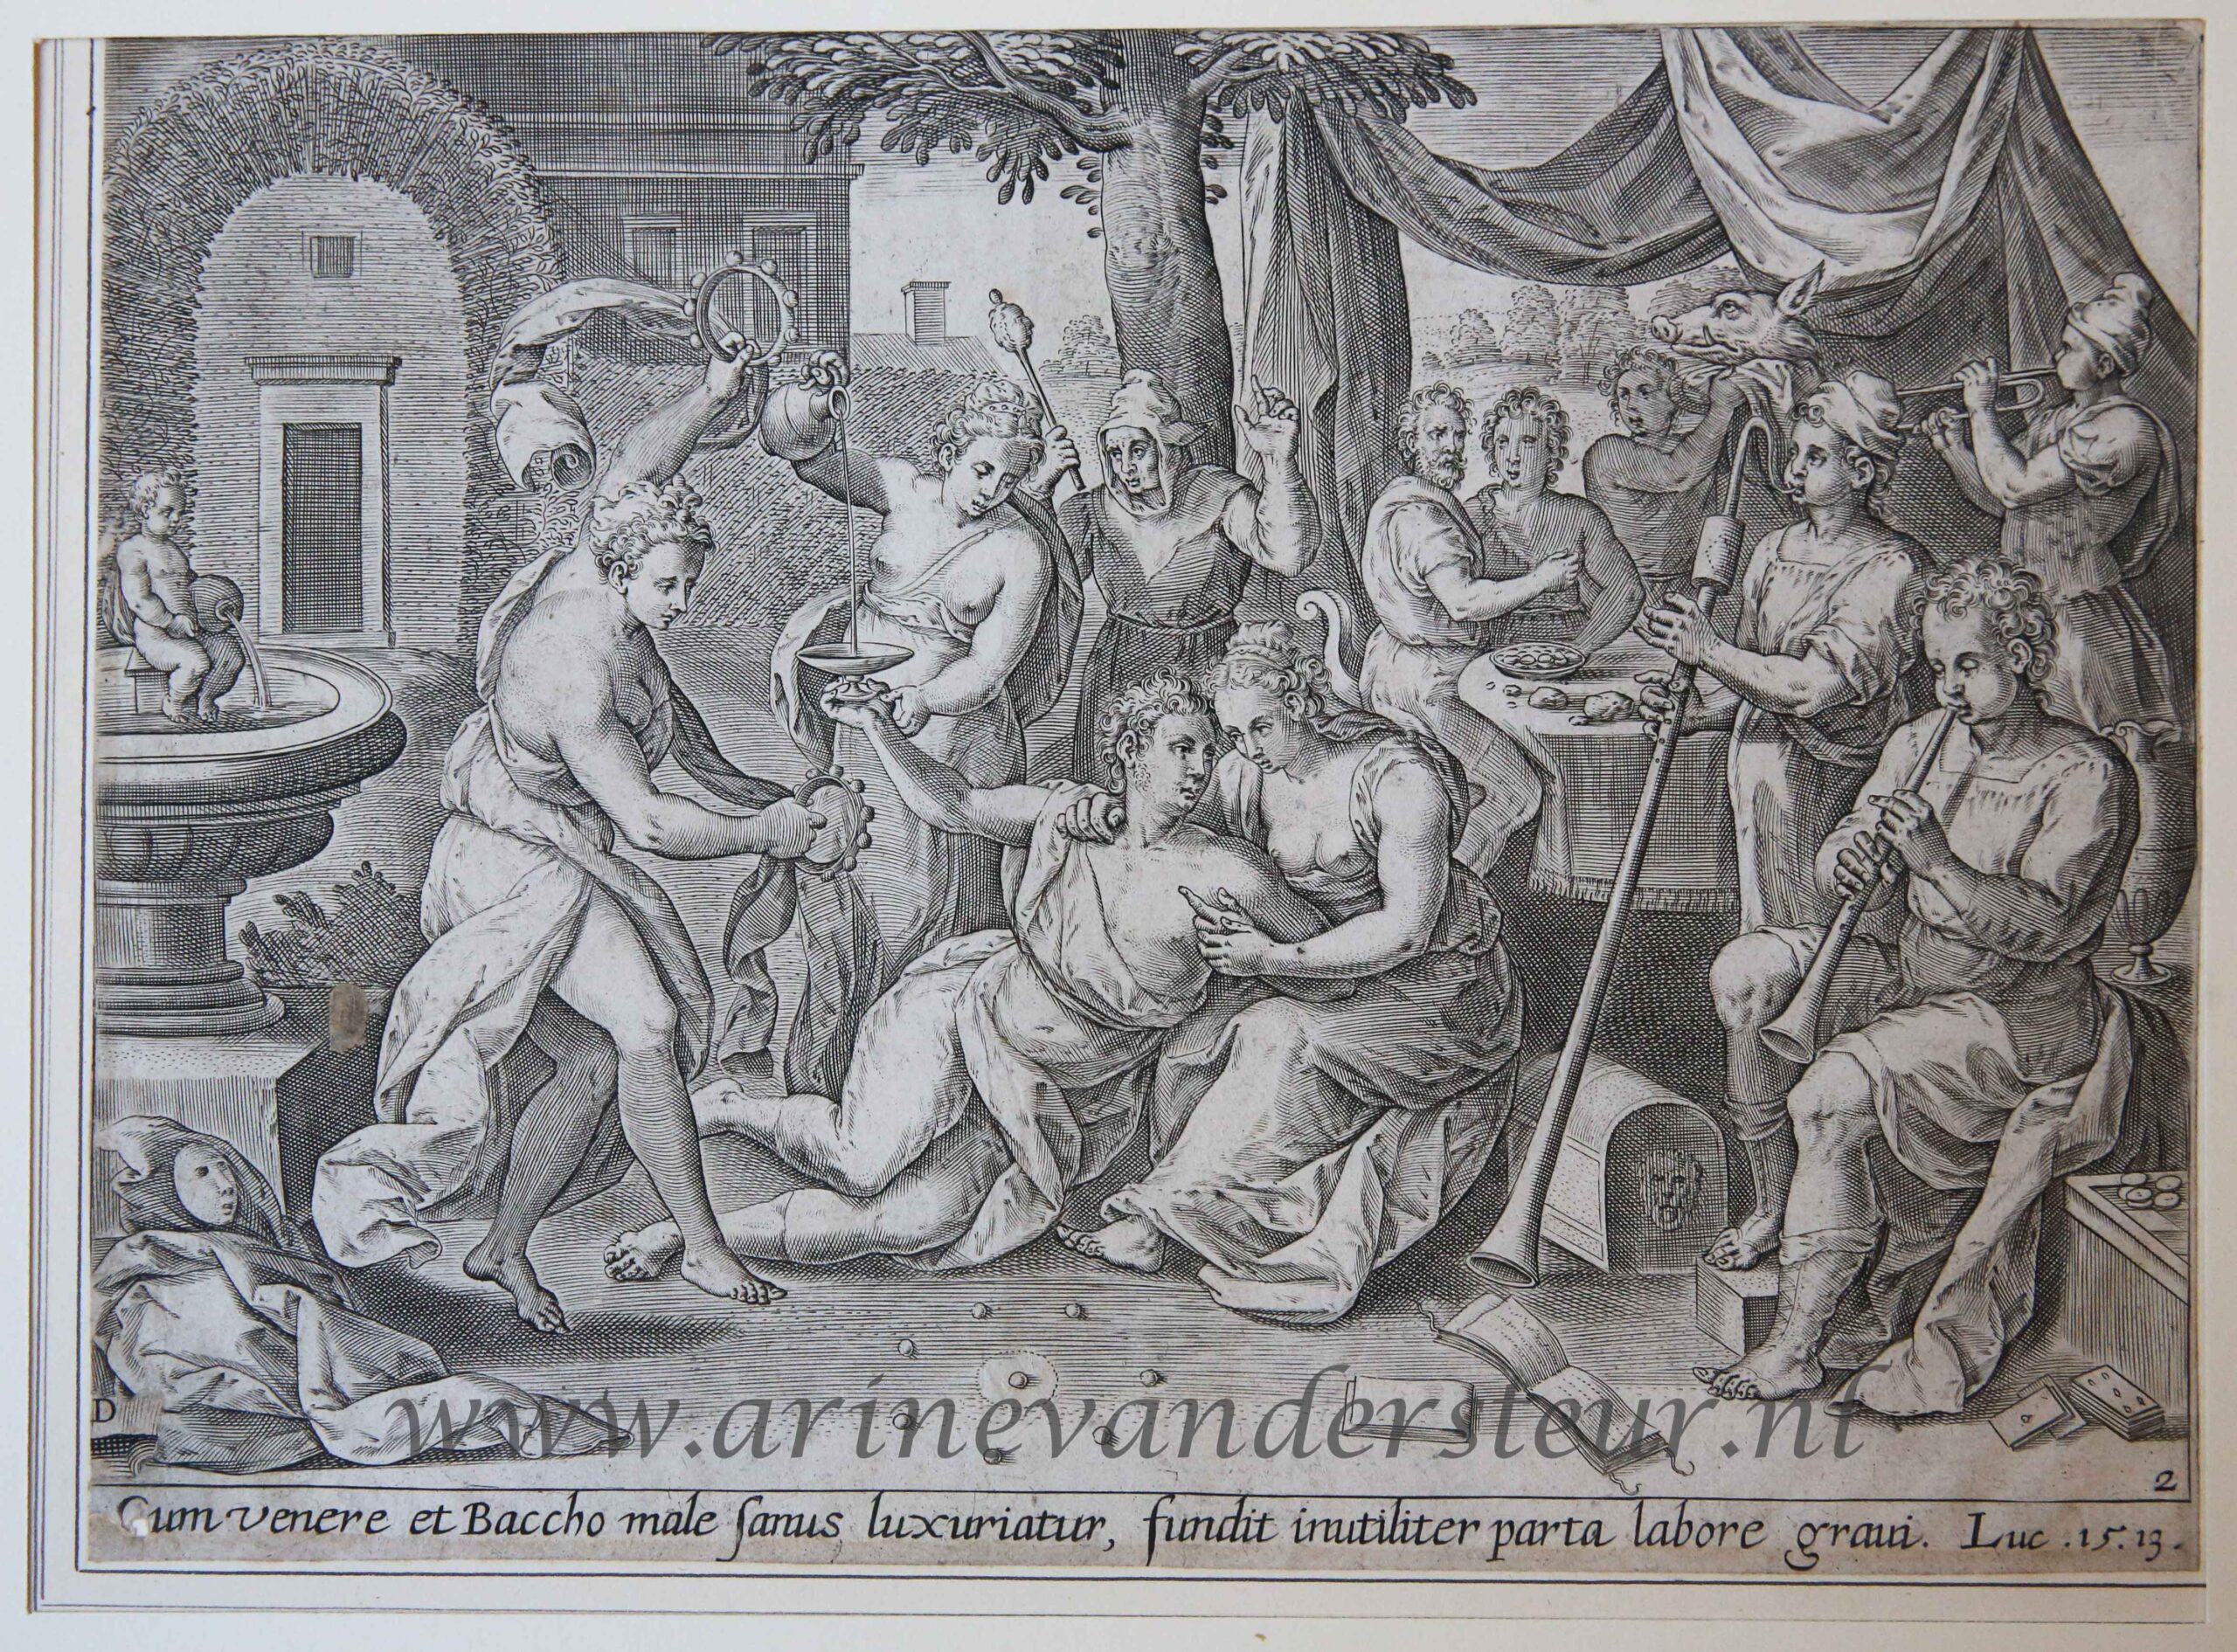 [Antique print, engraving, 1643] The Prodigal Son wasting his substance / De verloren zoon verkwist zijn erfenis [Set of 4 plates: The parable of the Prodigal Son], published 1643, 1 p.